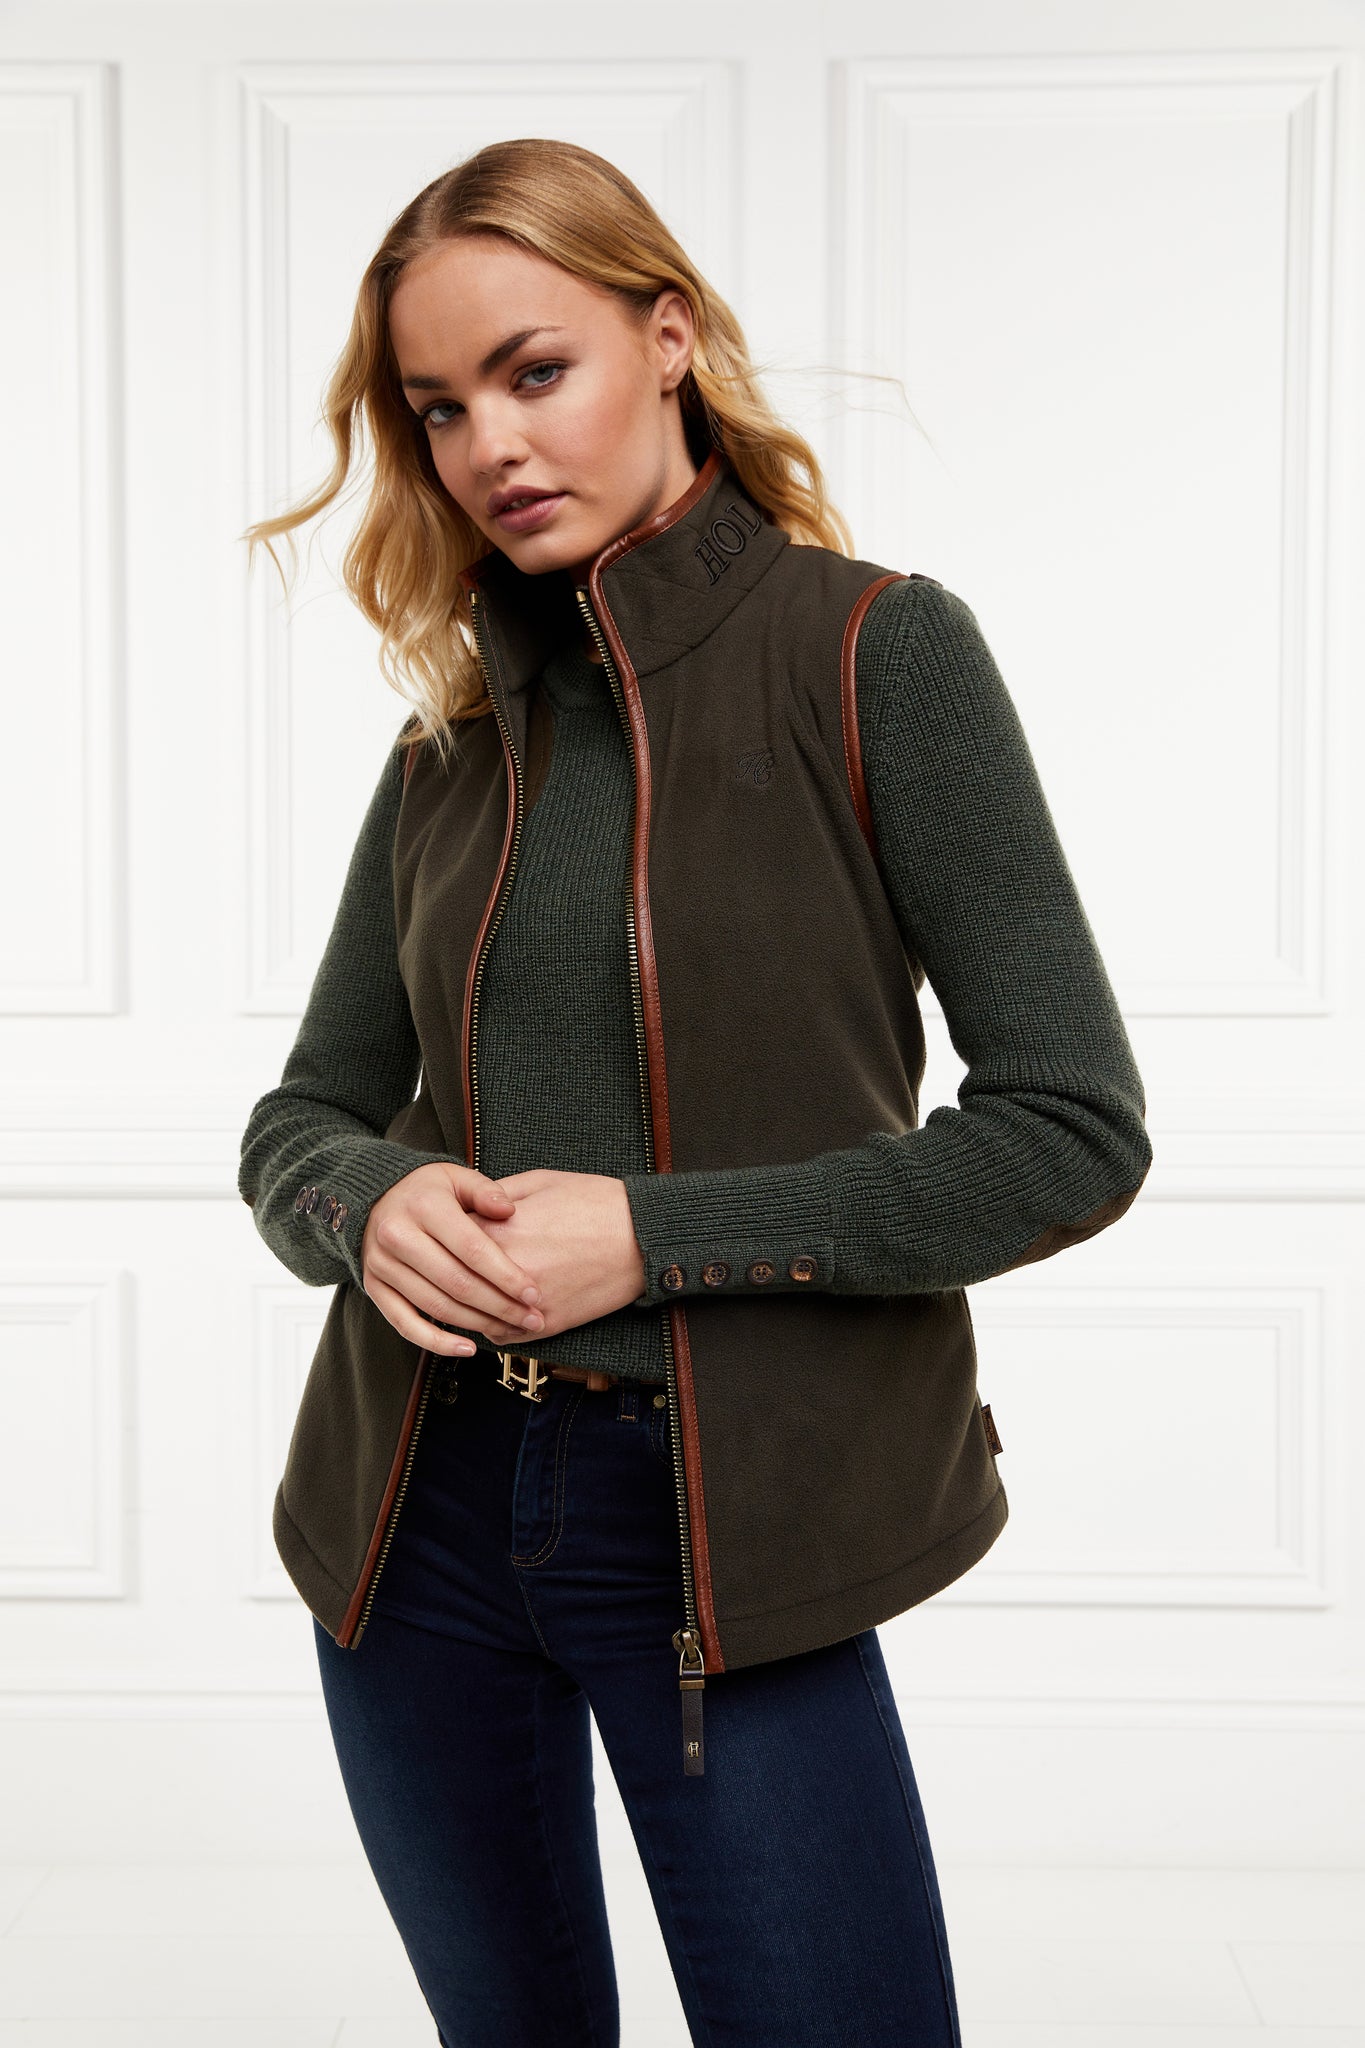 womens fleece gilet in khaki with tan leather piping around armholes neckline and down the front zip fastening